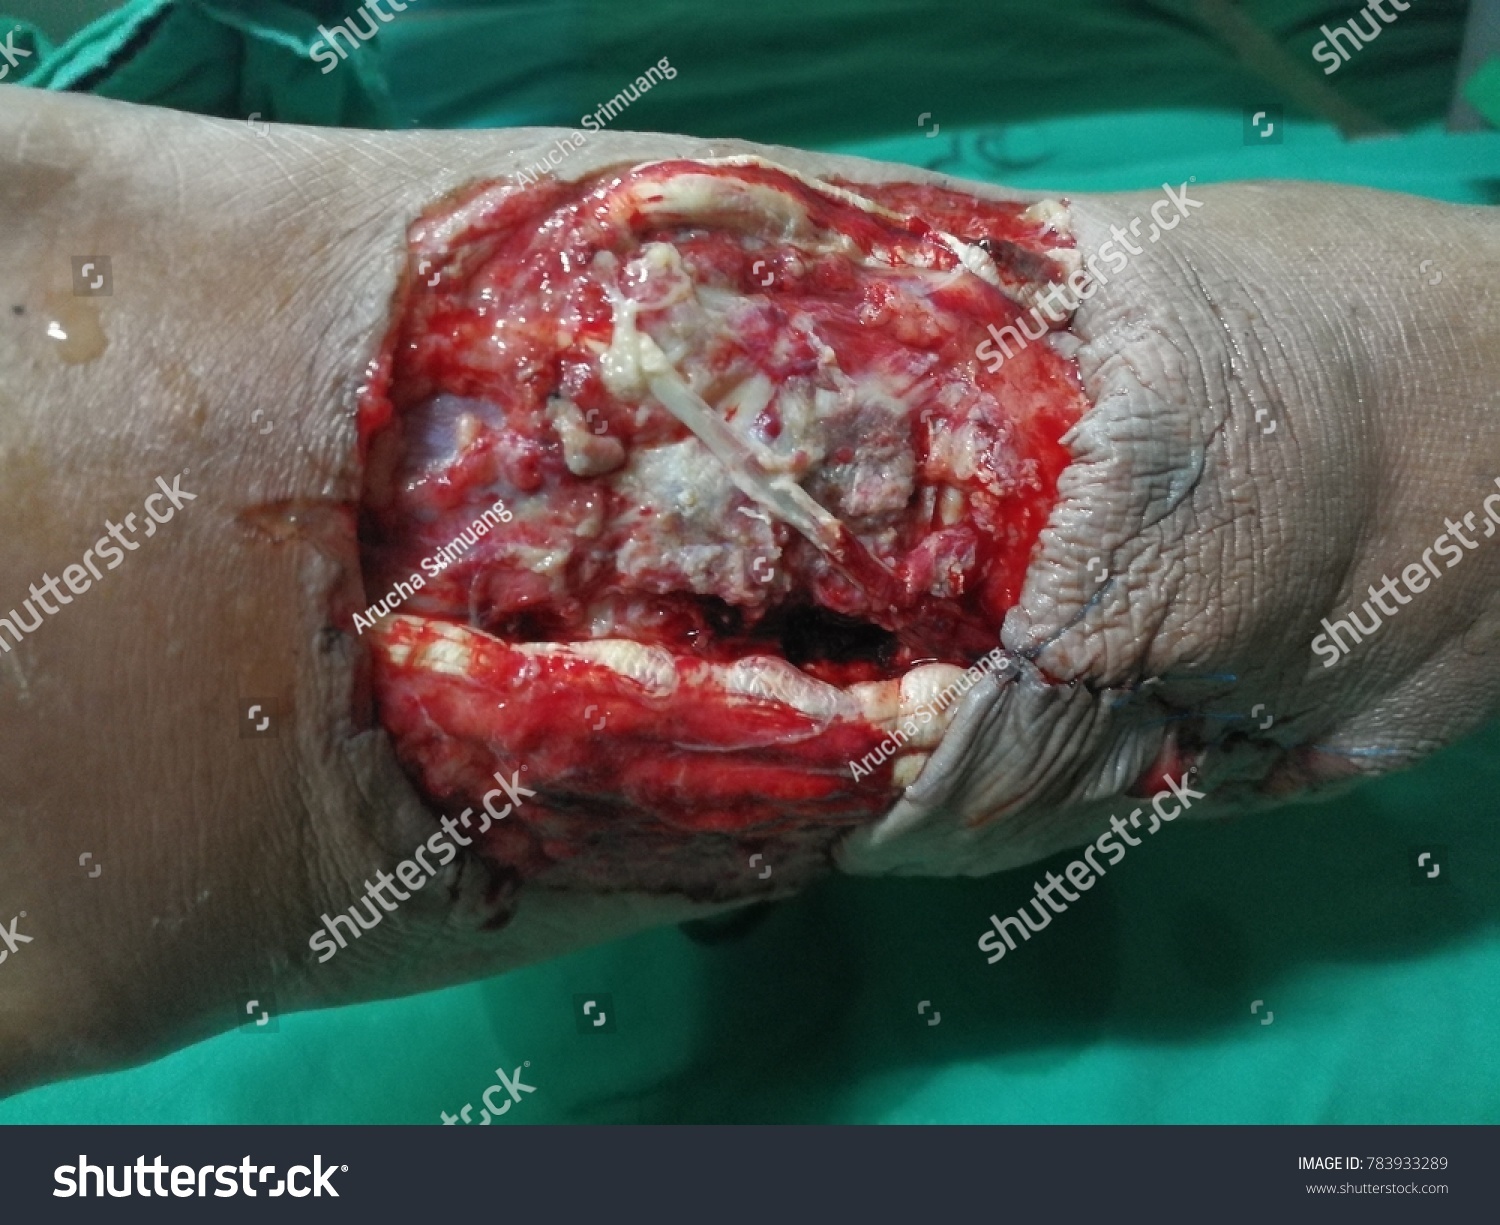 https://image.shutterstock.com/z/stock-photo-open-wound-and-tendon-injury-783933289.jpg